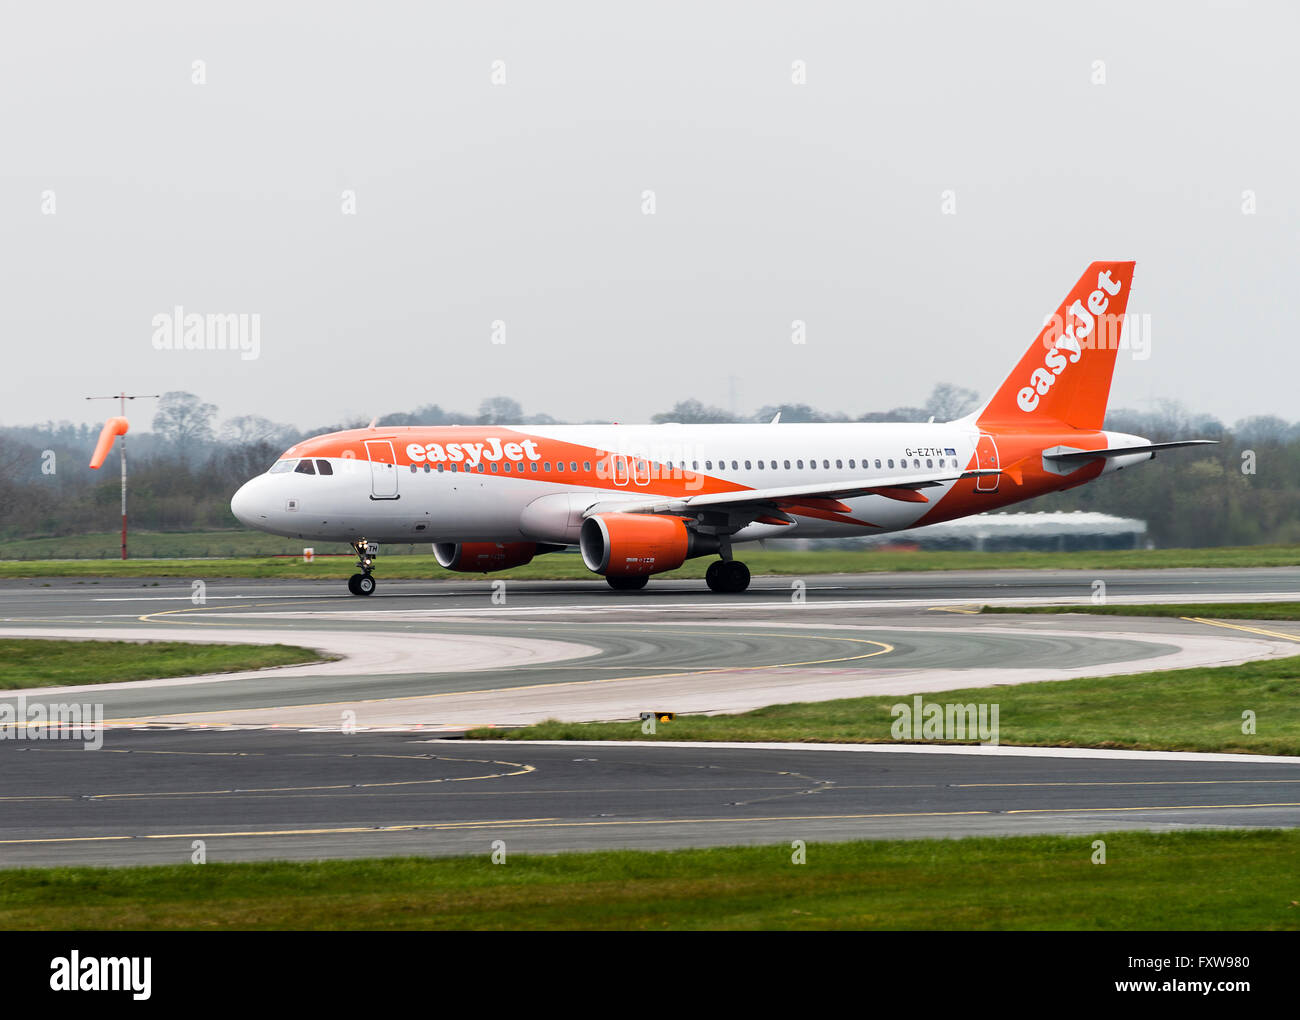 EasyJet Airline Airbus A320-214 Airliner G-EZTH Taking Off at Manchester International Airport England United Kingdom UK Stock Photo